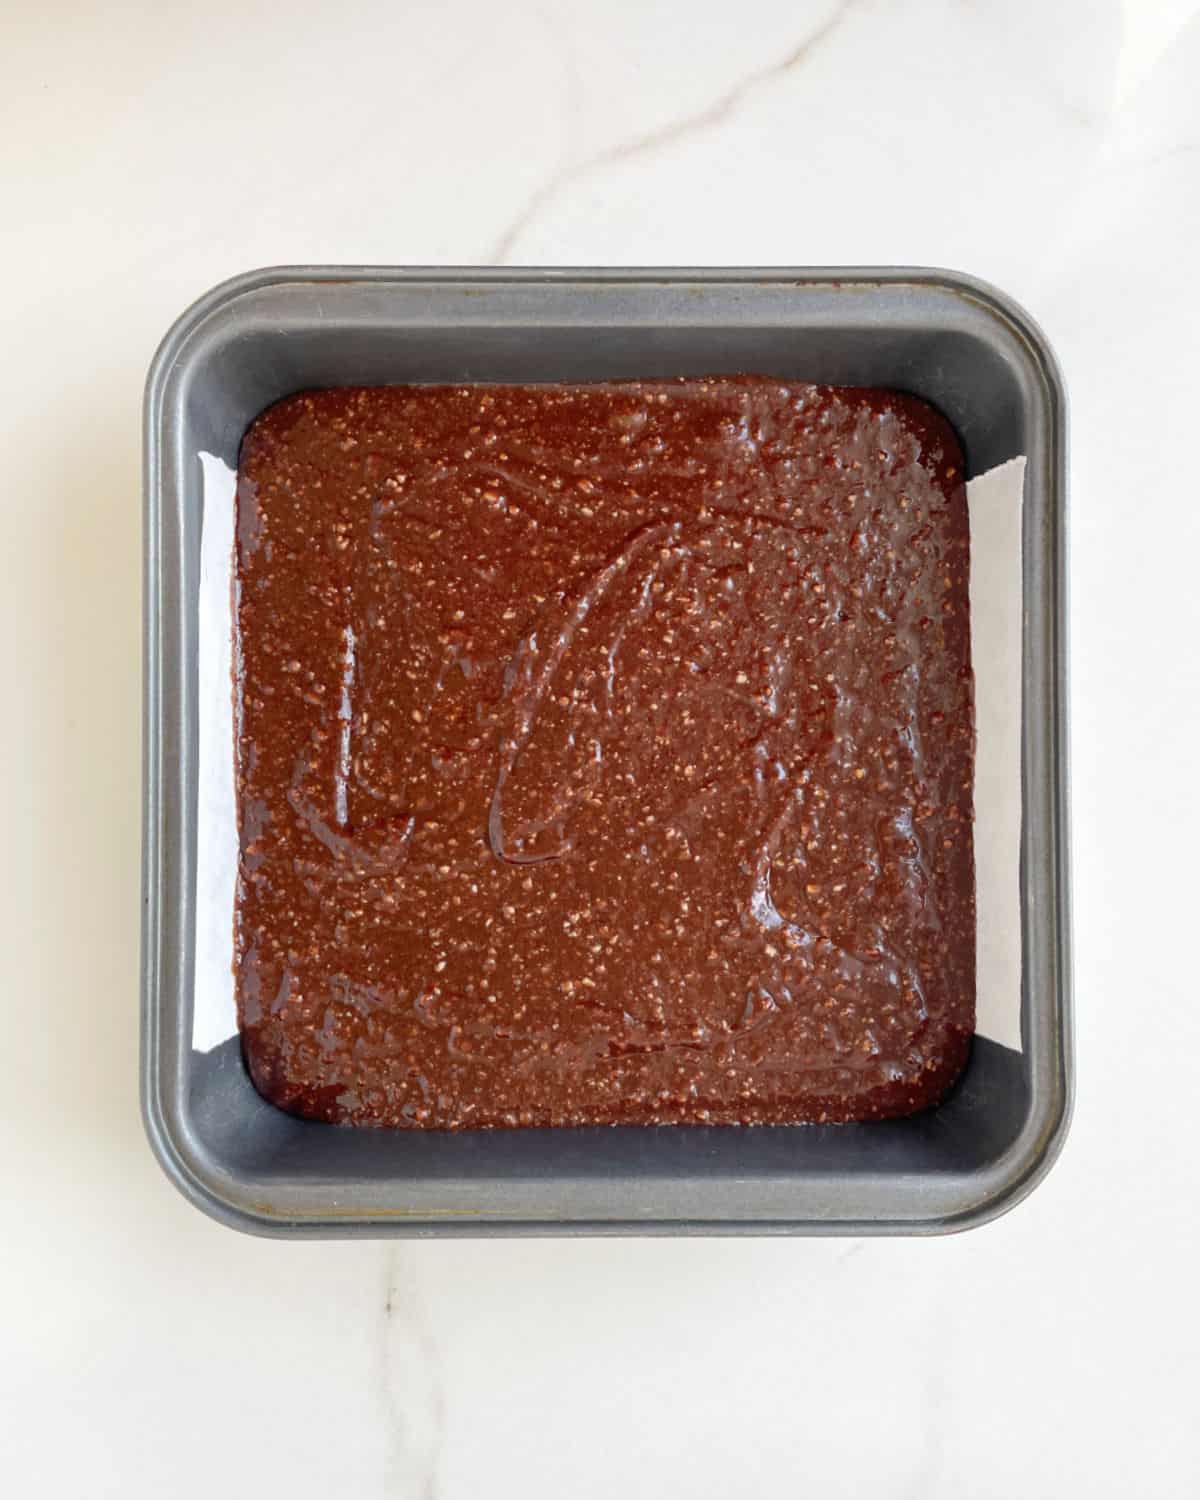 Brownie batter in a square metal pan on a white marble surface.